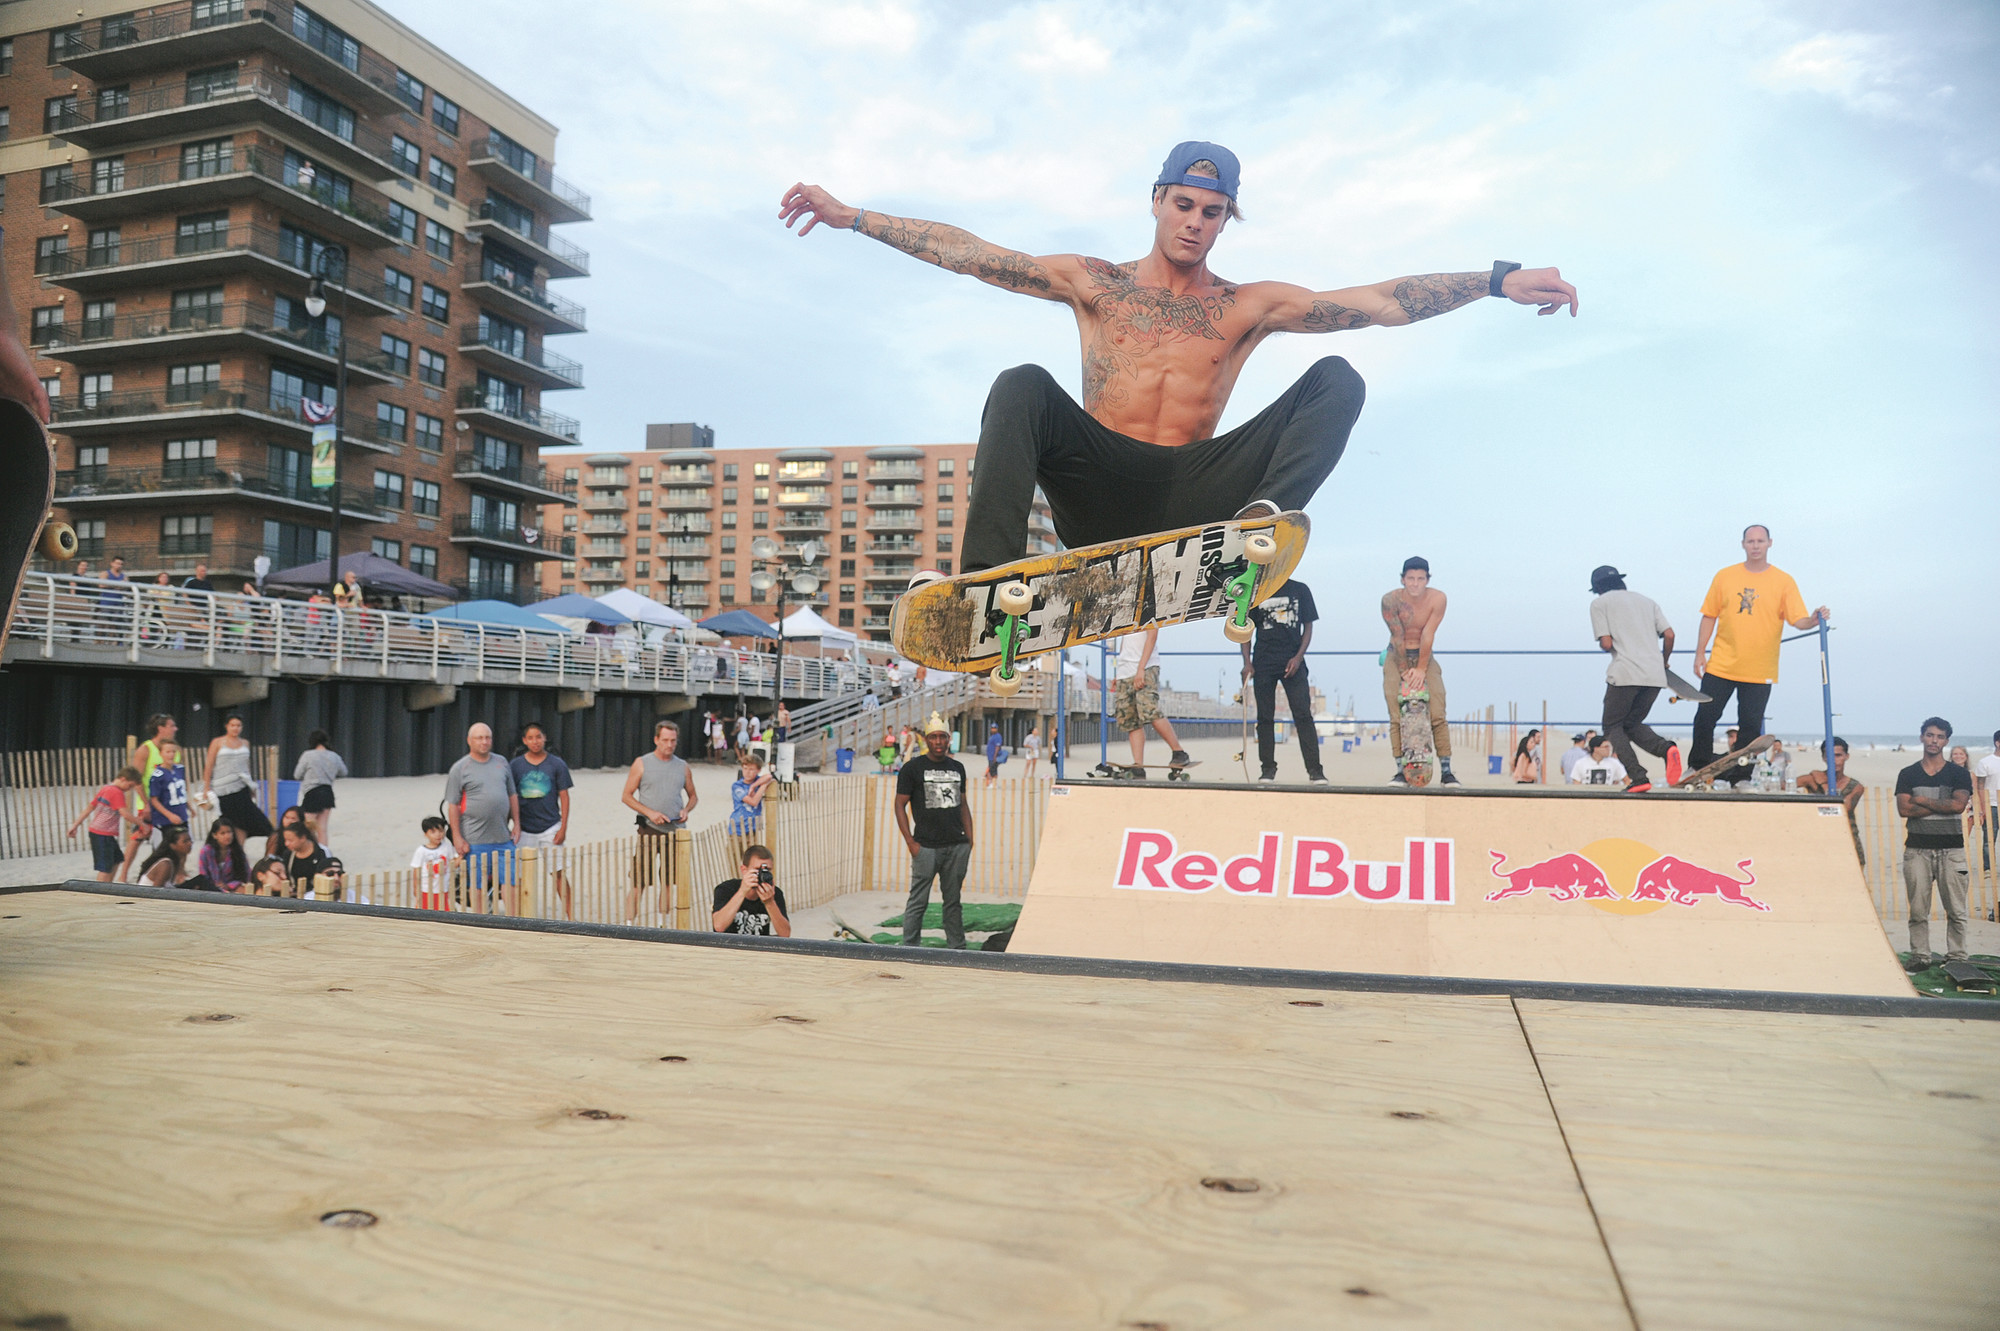 Anthony Brippele, of Long Beach, competed in the skateboarding contest.